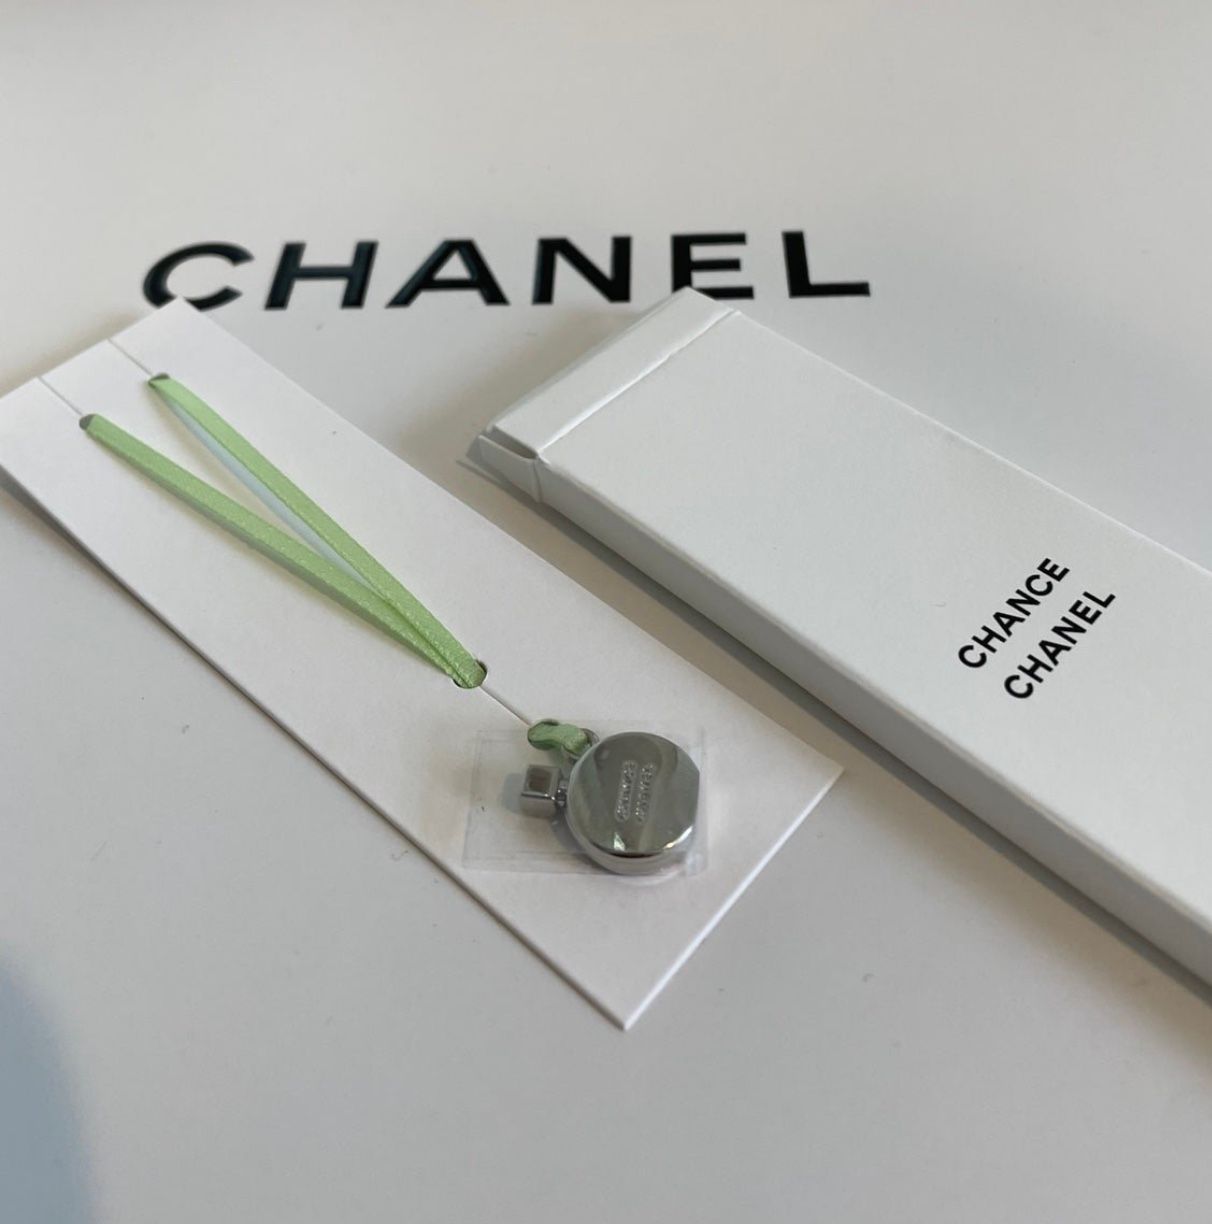 CHANEL MOBILE PHONE CHARM. New , See Pics For Details.